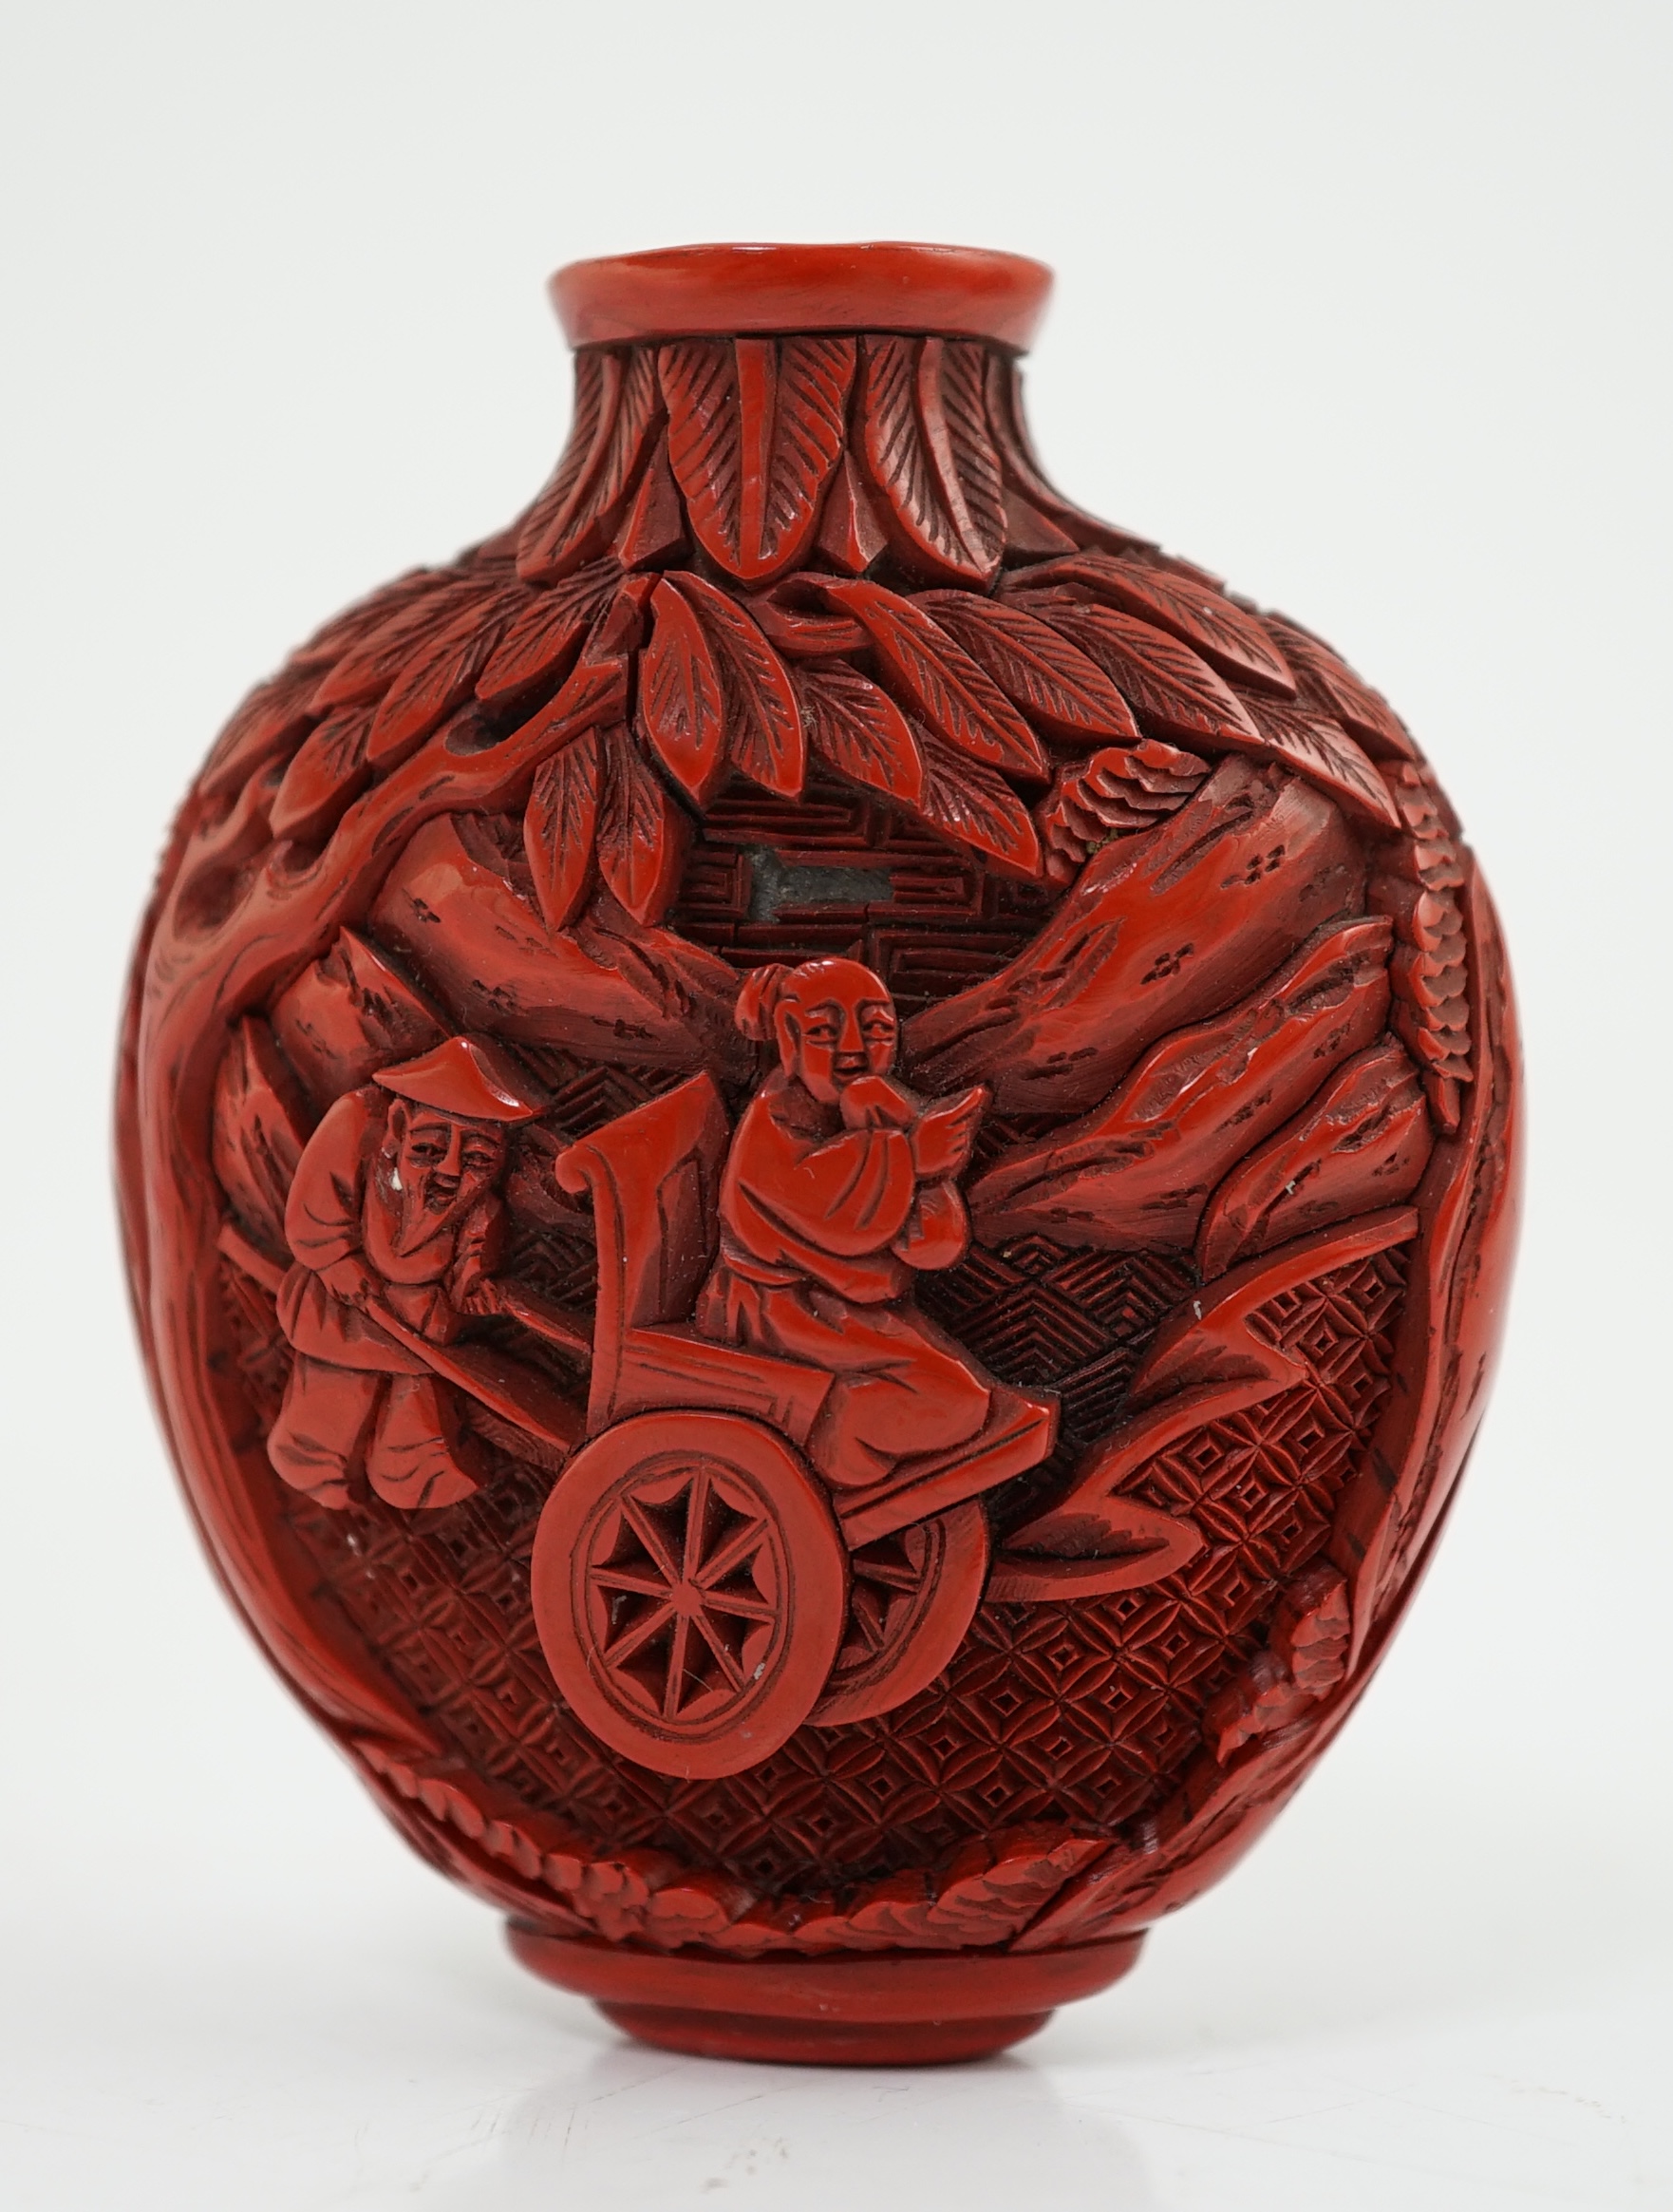 A Chinese cinnabar lacquer snuff bottle, 19th century, minor damage